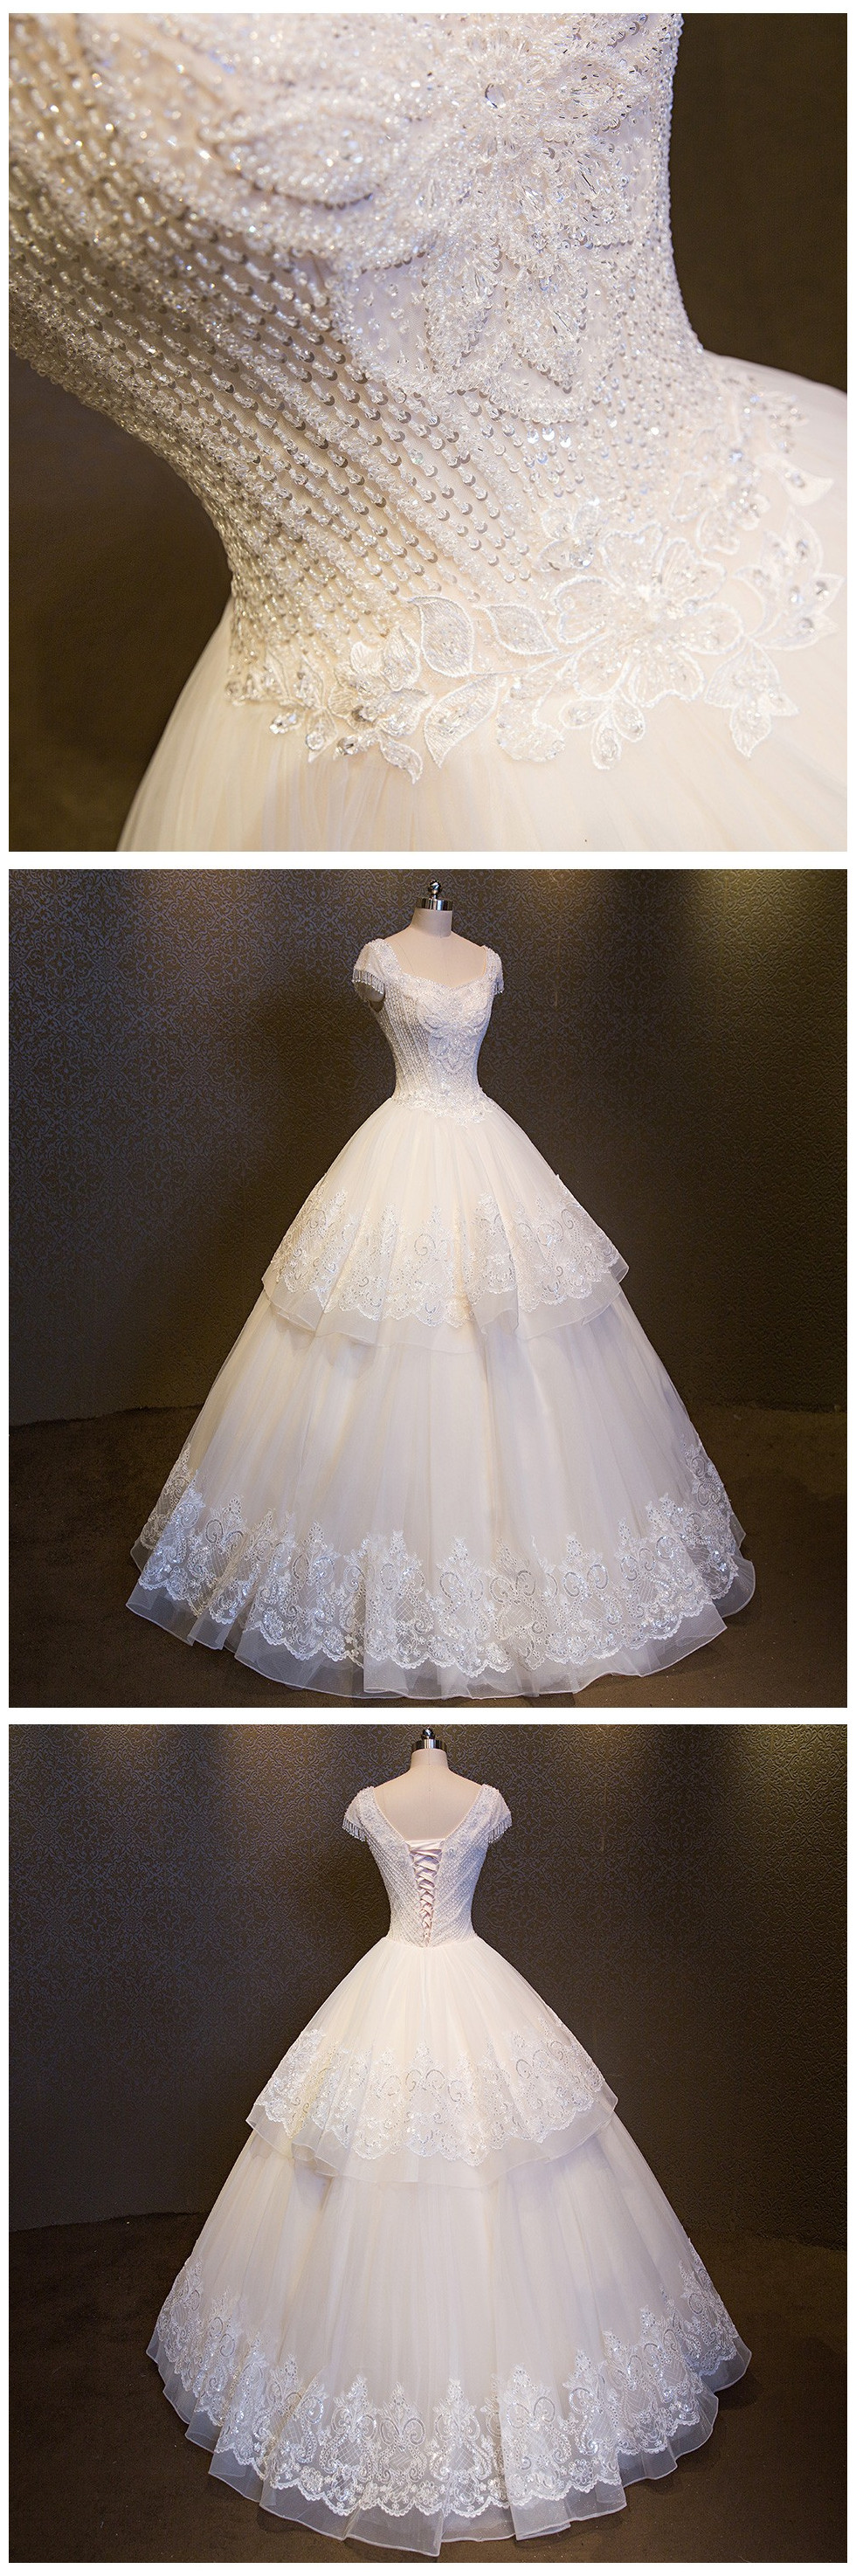 Wedding Dress Double V-neck Luxury Ball Gown Collar Crystals Cap Sleeve Backless Lace Up Back Crystals Robe De Mari Bridal Dresses